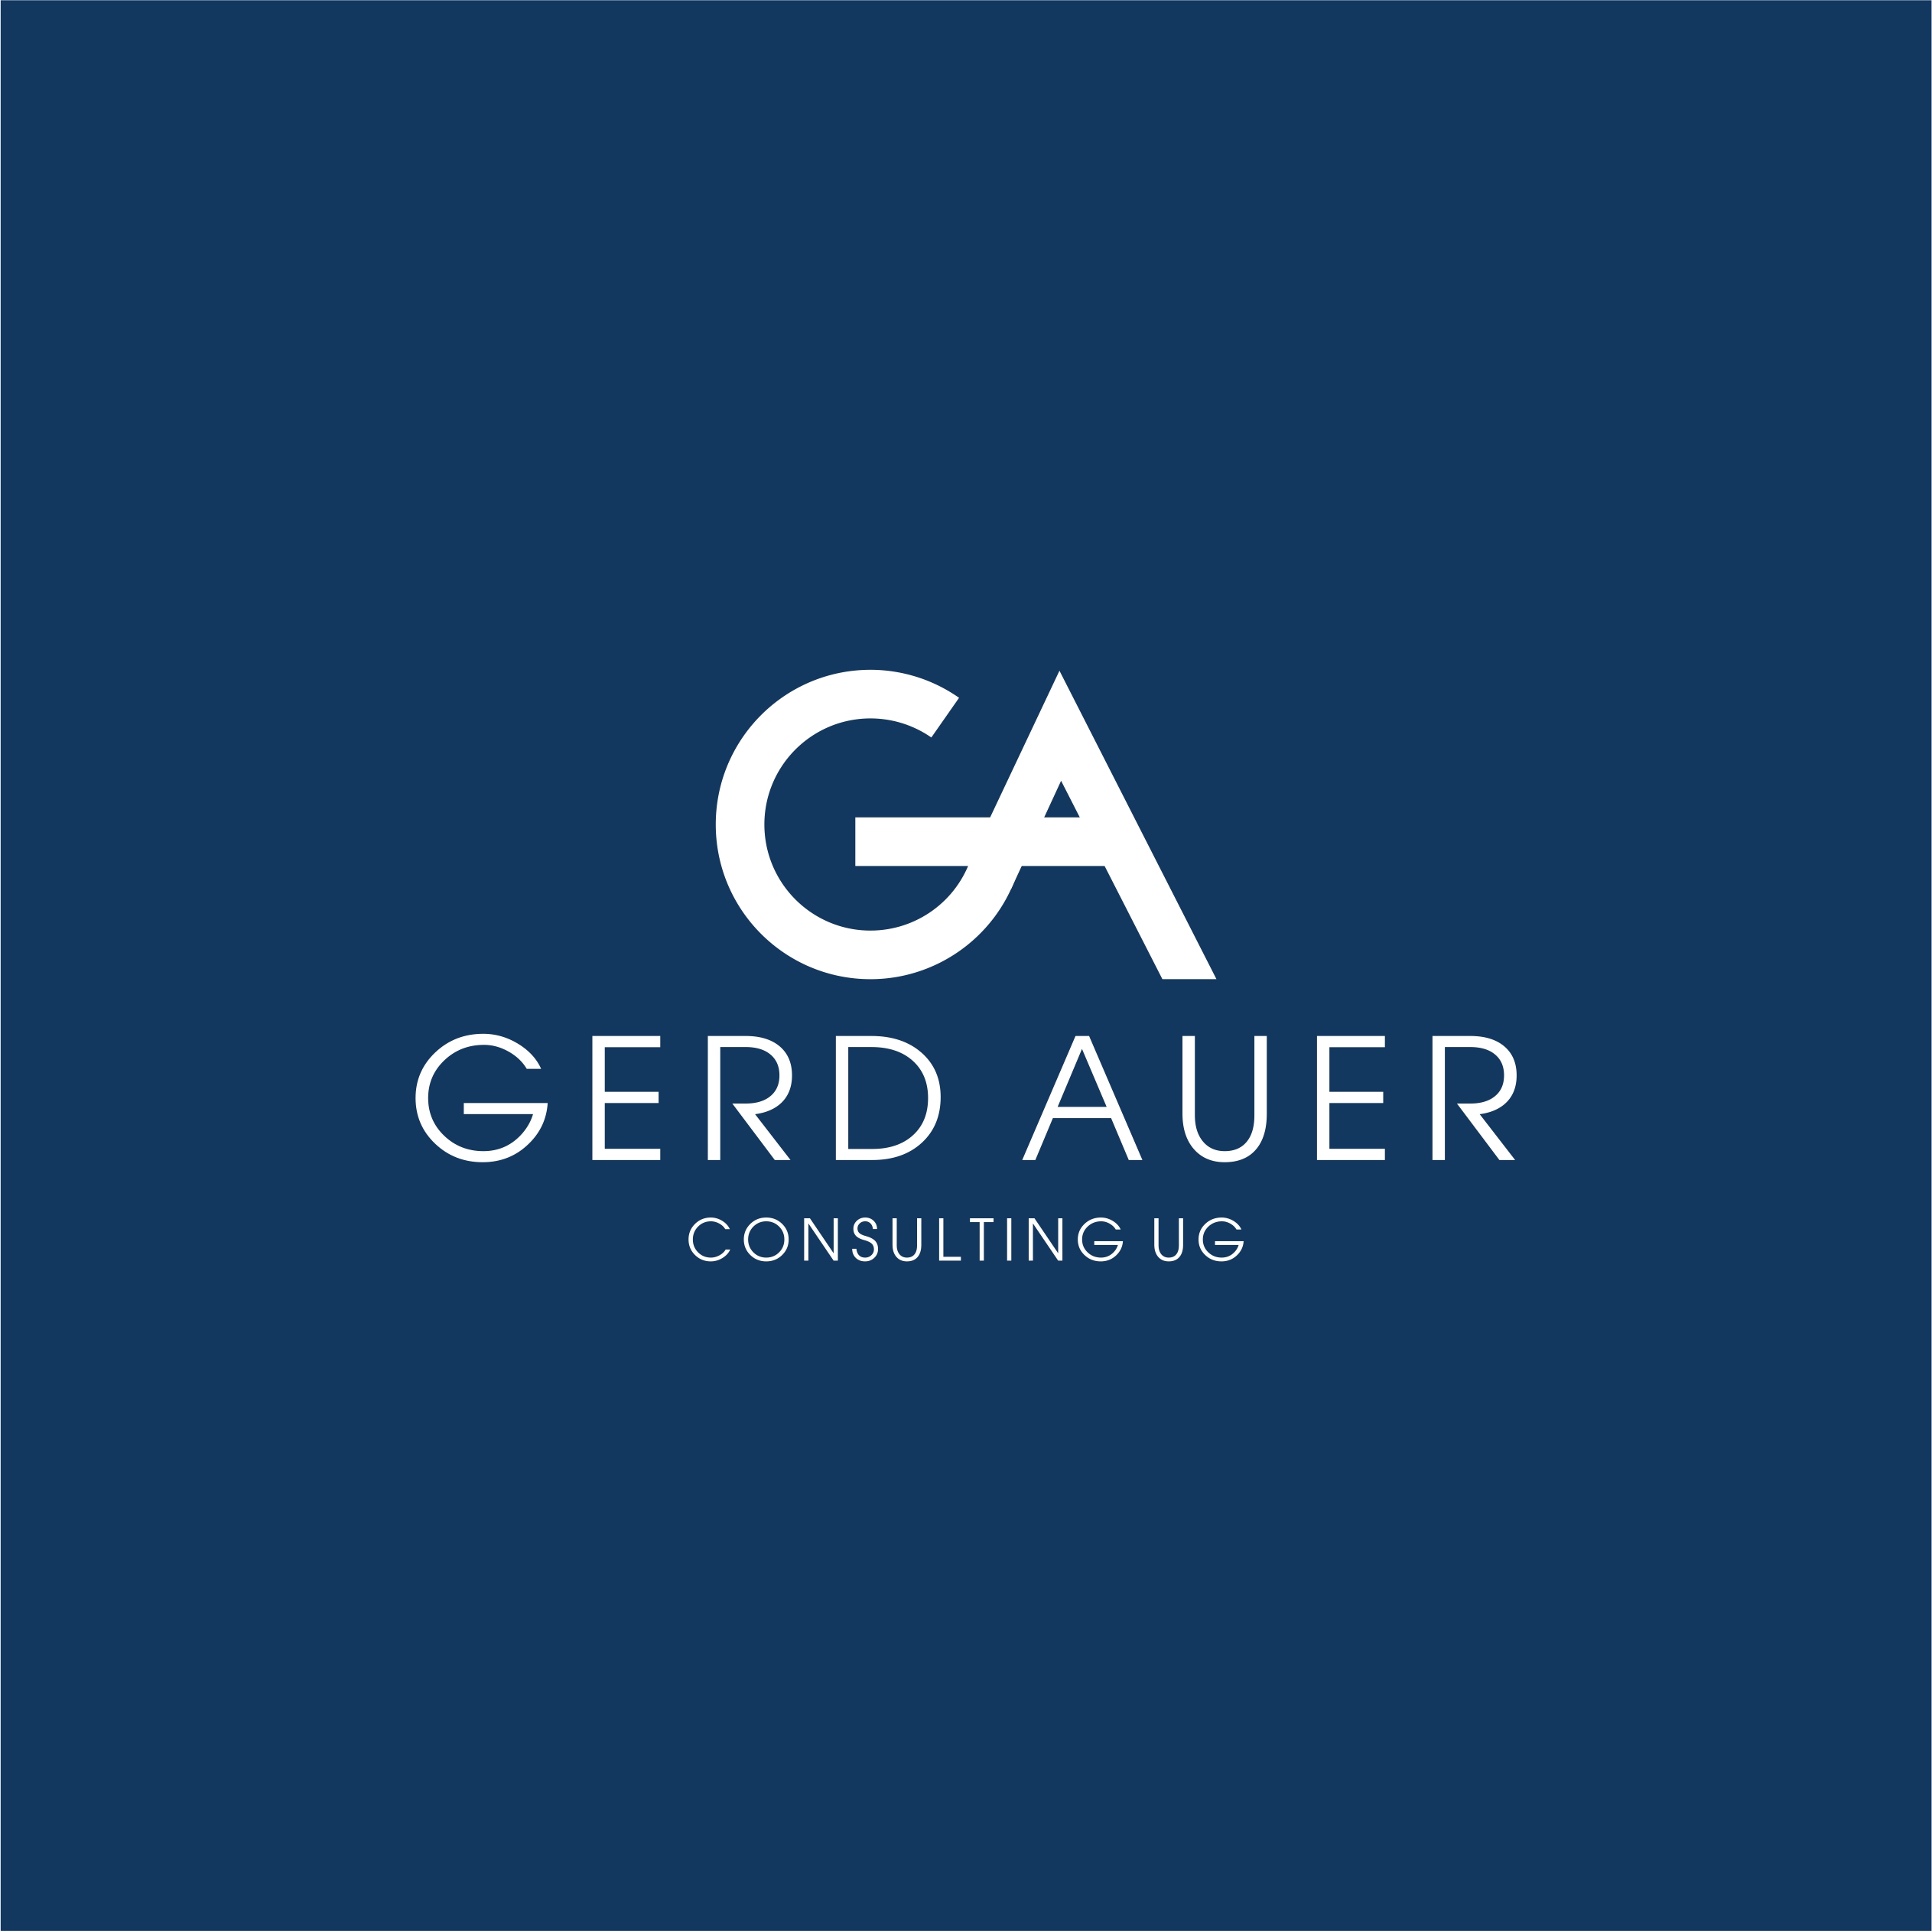 Gerd Auer Consulting UG